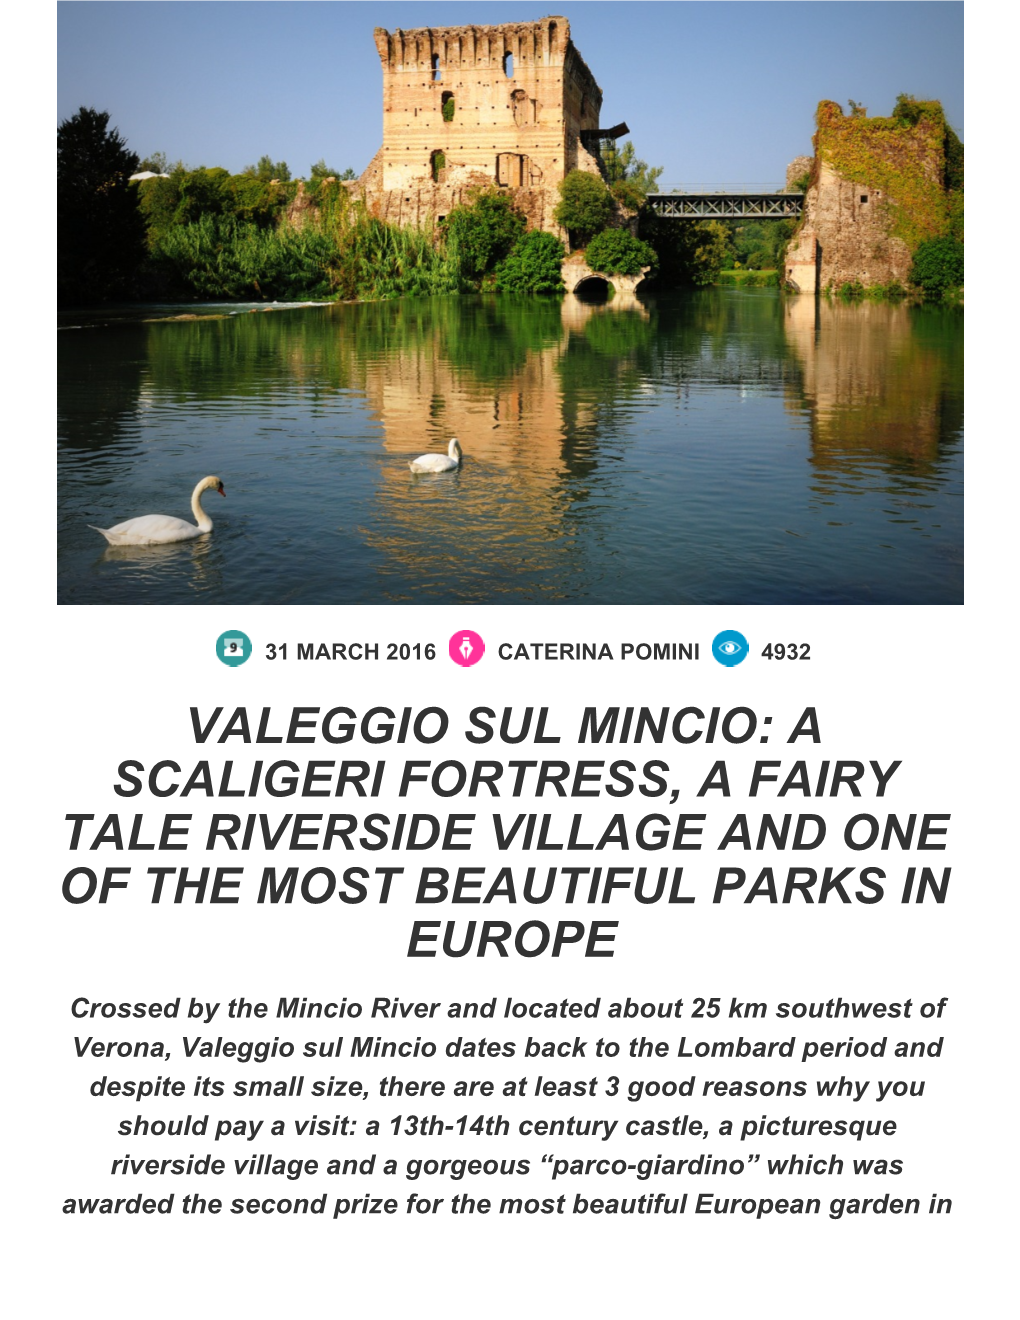 Valeggio Sul Mincio: a Scaligeri Fortress, a Fairy Tale Riverside Village and One of the Most Beautiful Parks in Europe